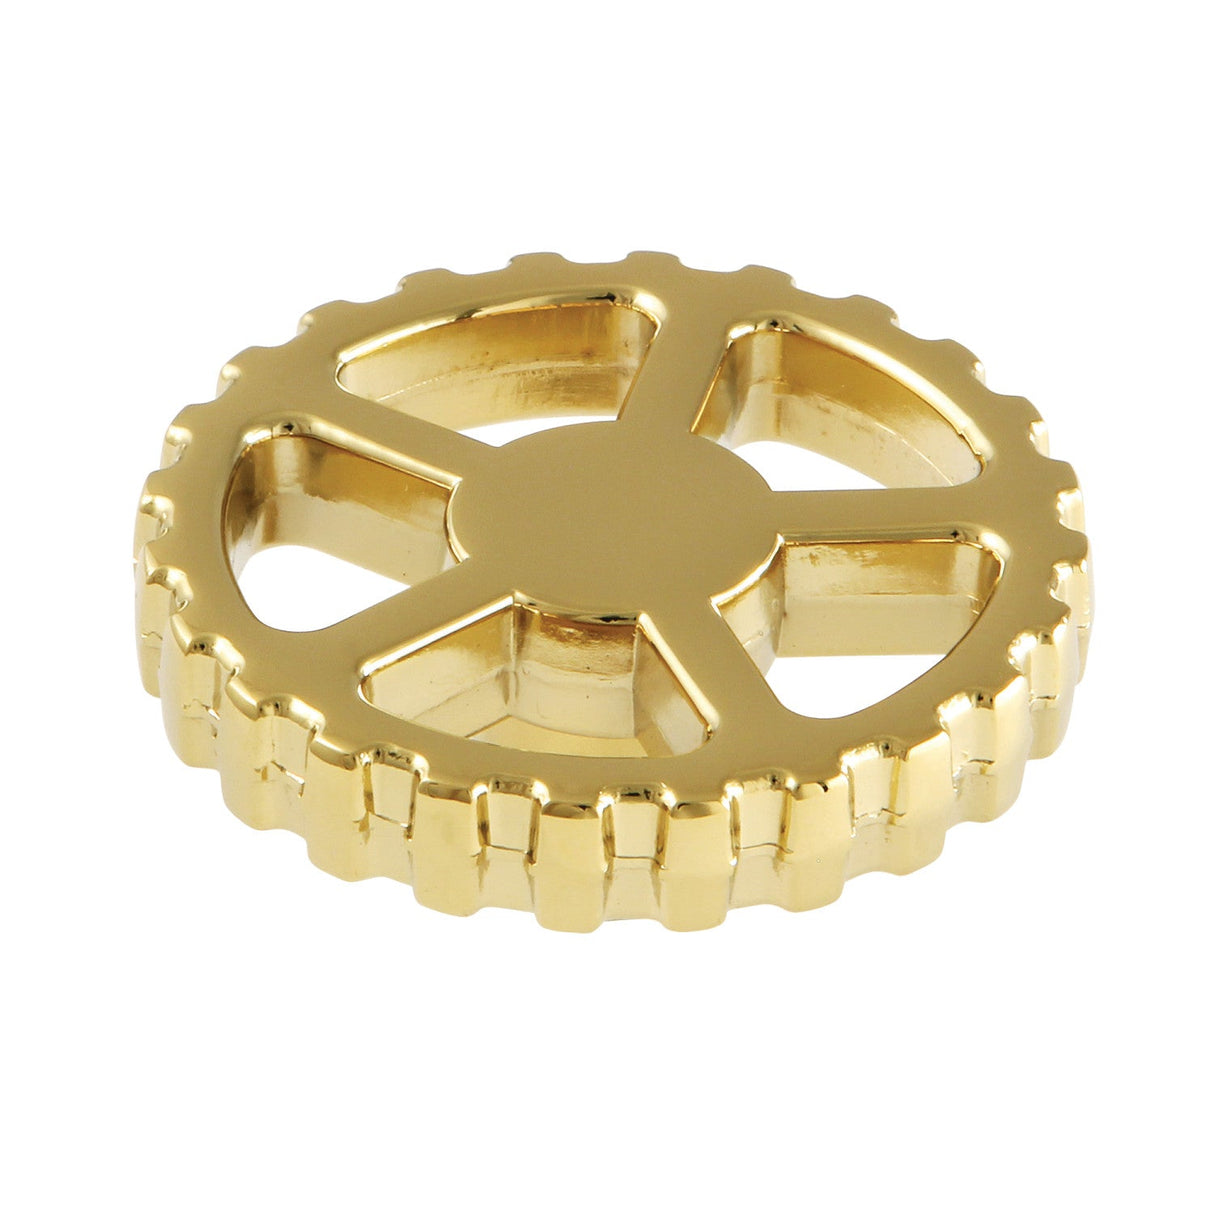 Fuller KSH2942CG Machine Gear Style Handle, Polished Brass